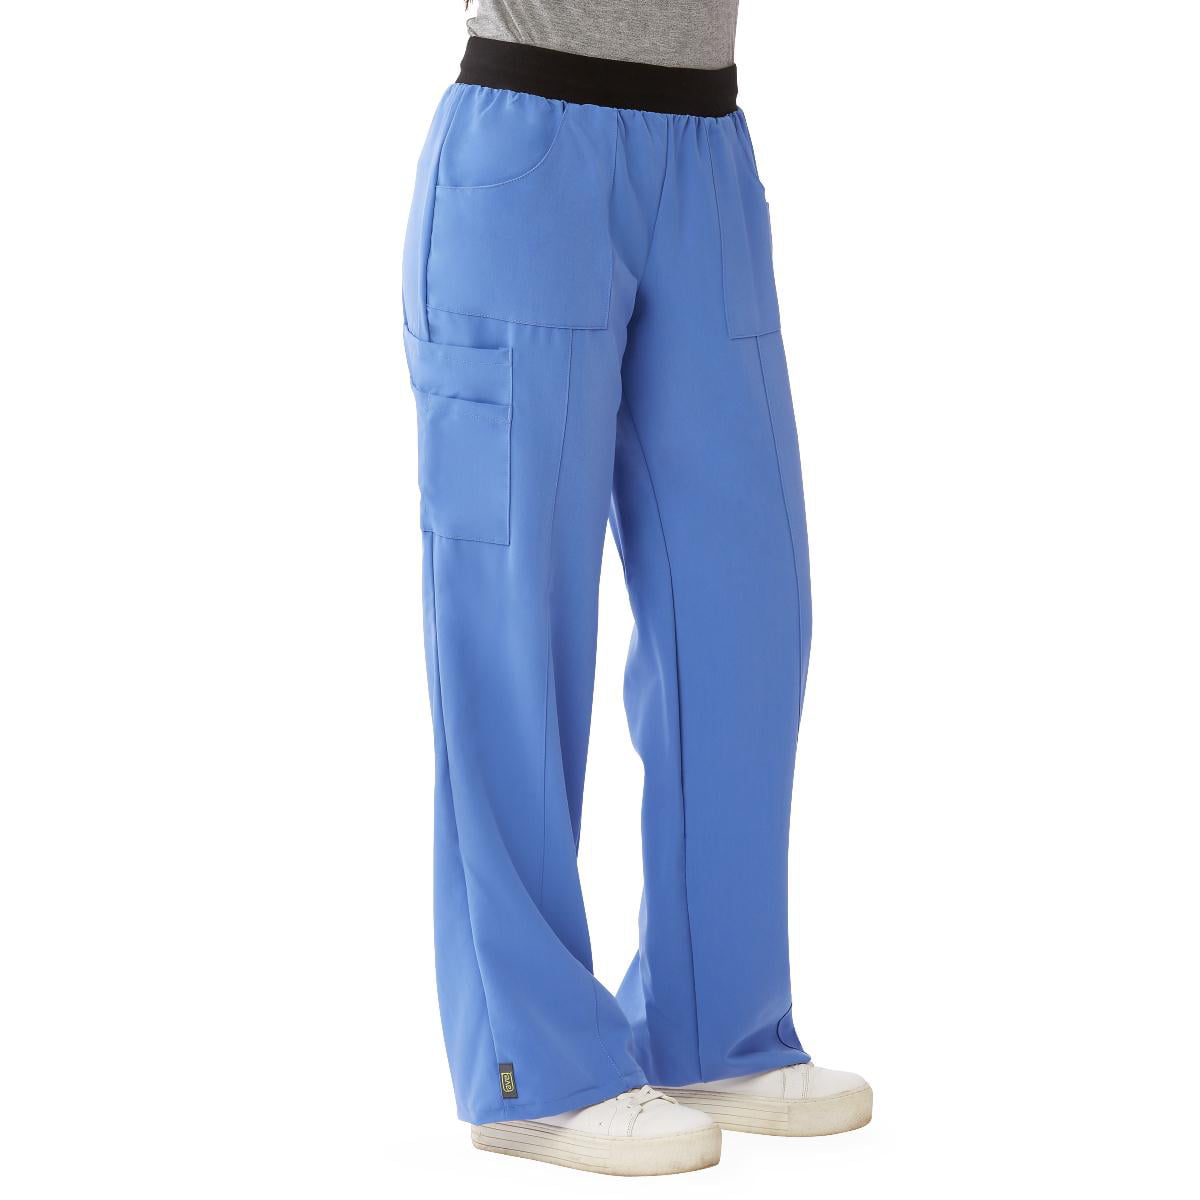 Medline Pacific ave™ Women's Stretch Wide Waistband Scrub Pant ...